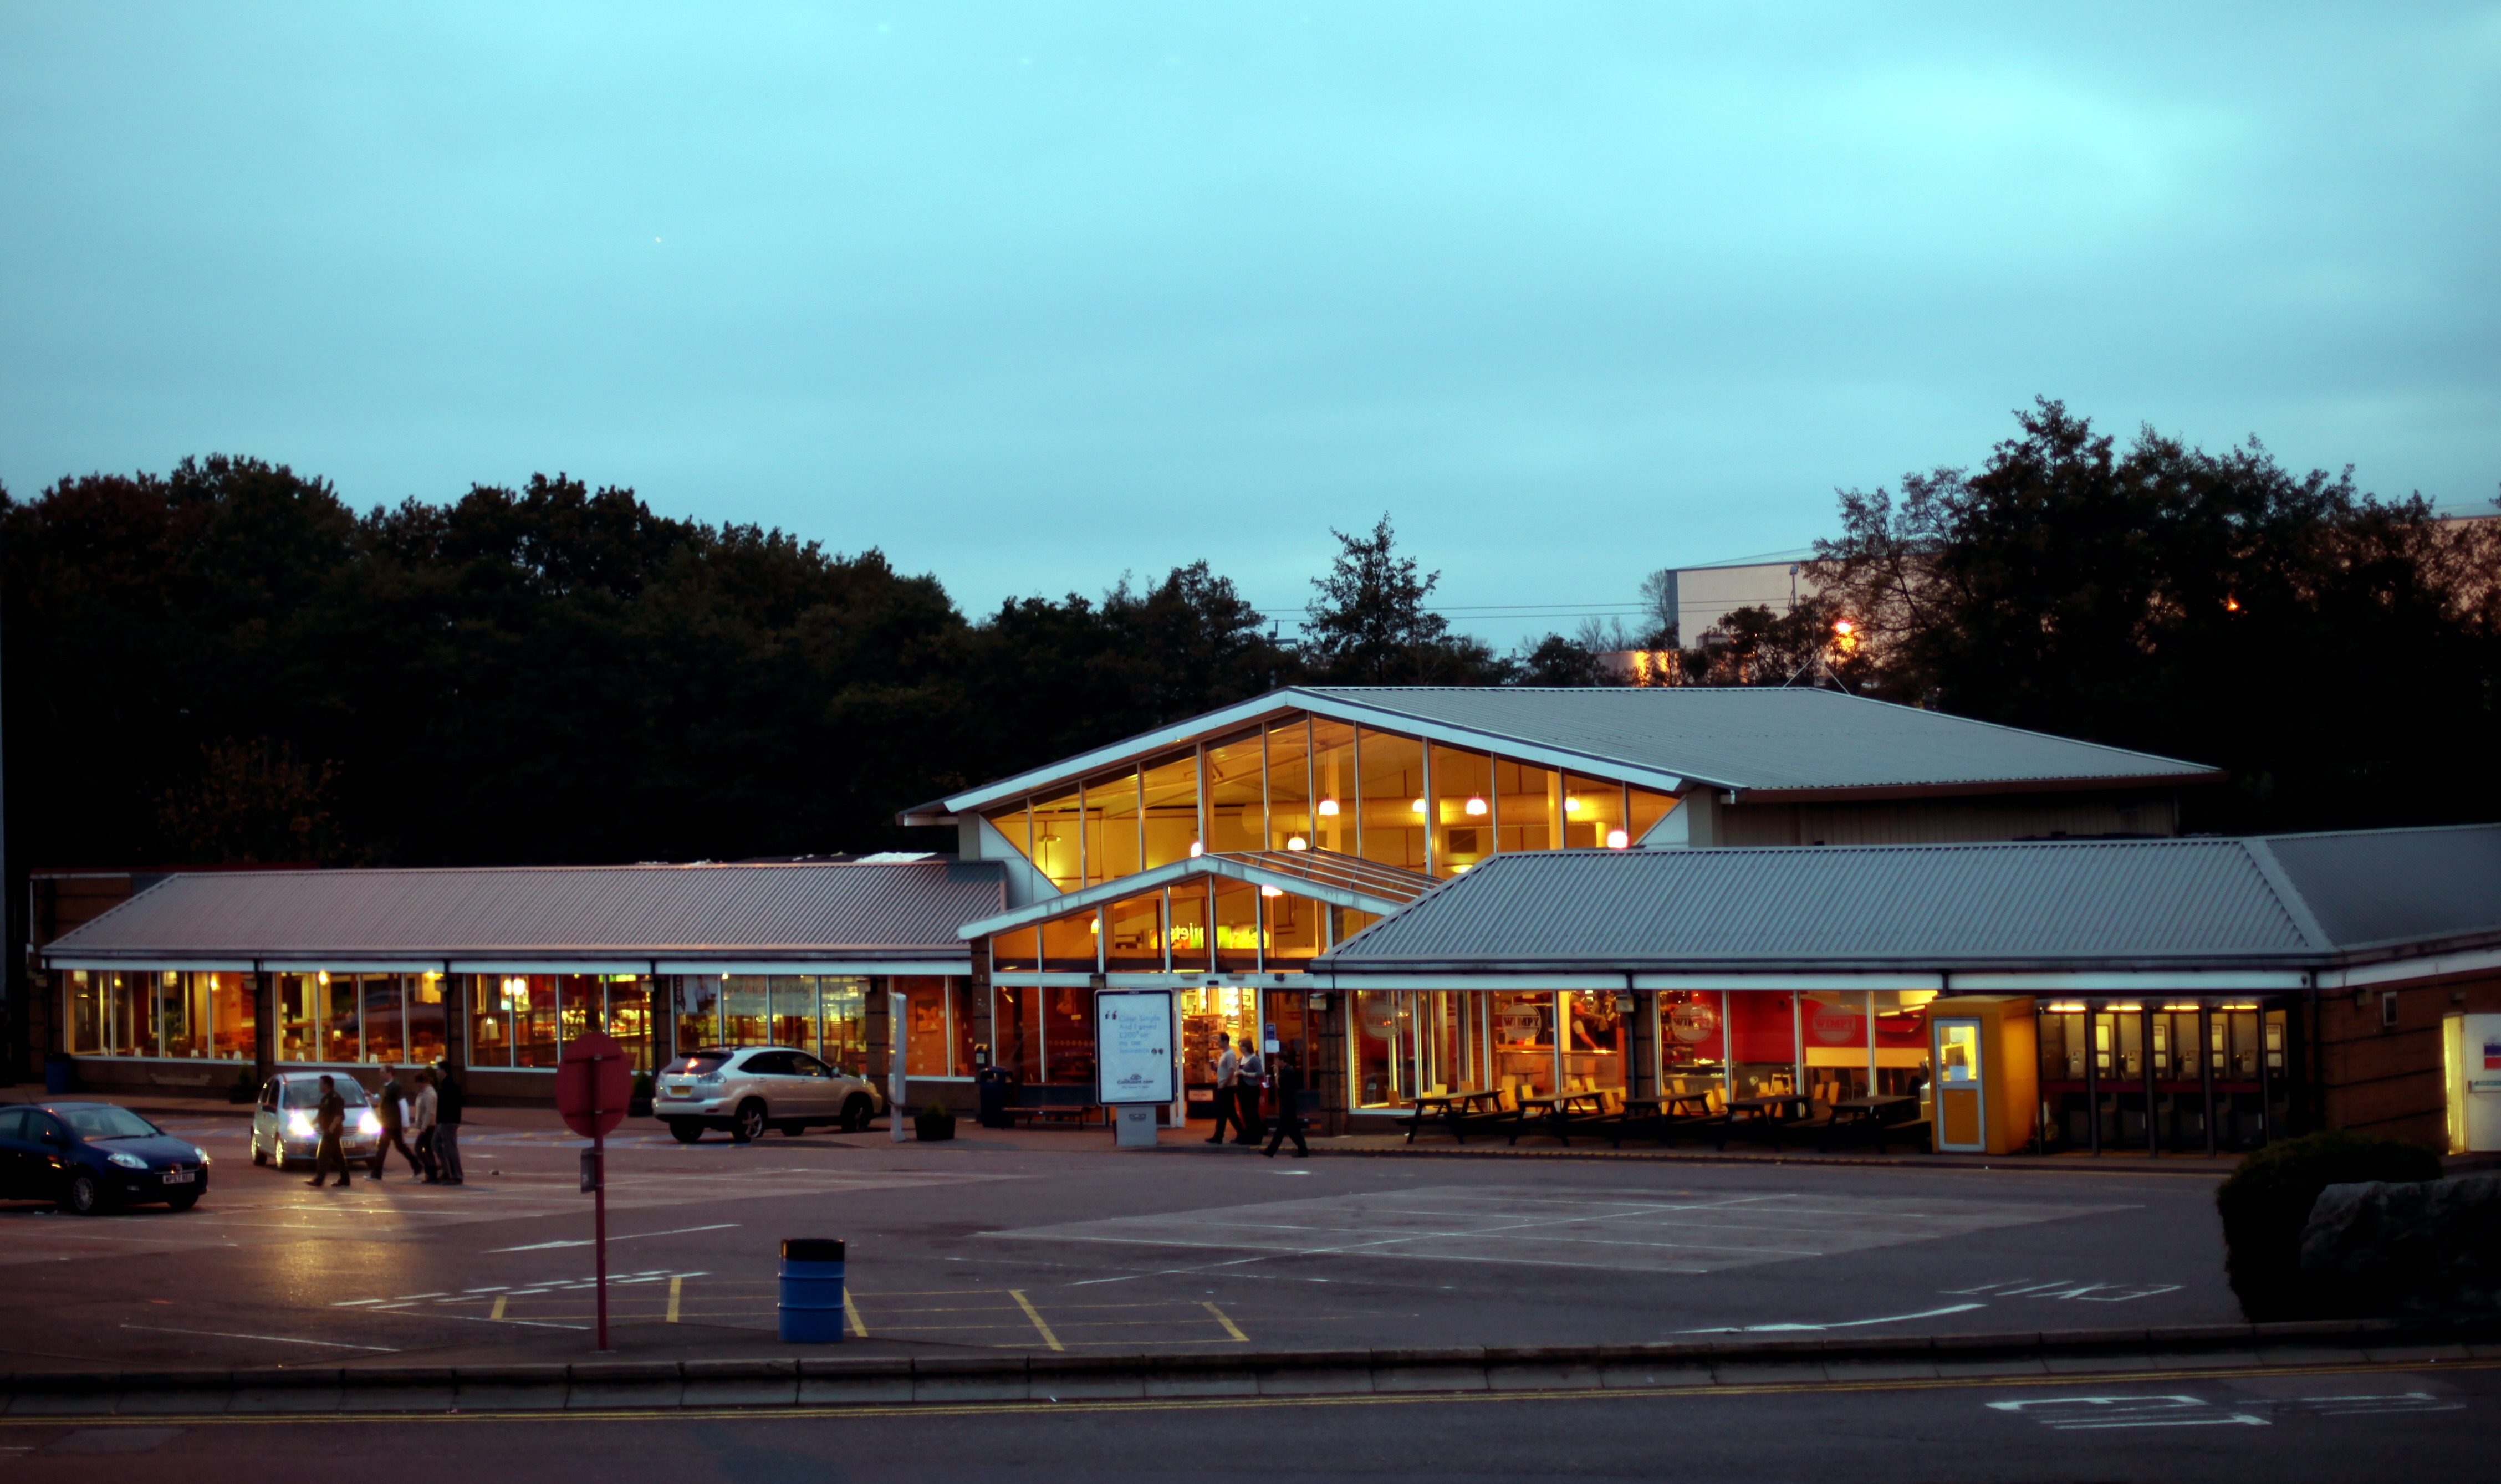 Watford Gap services is renowned as one of the 'most famous' in the UK